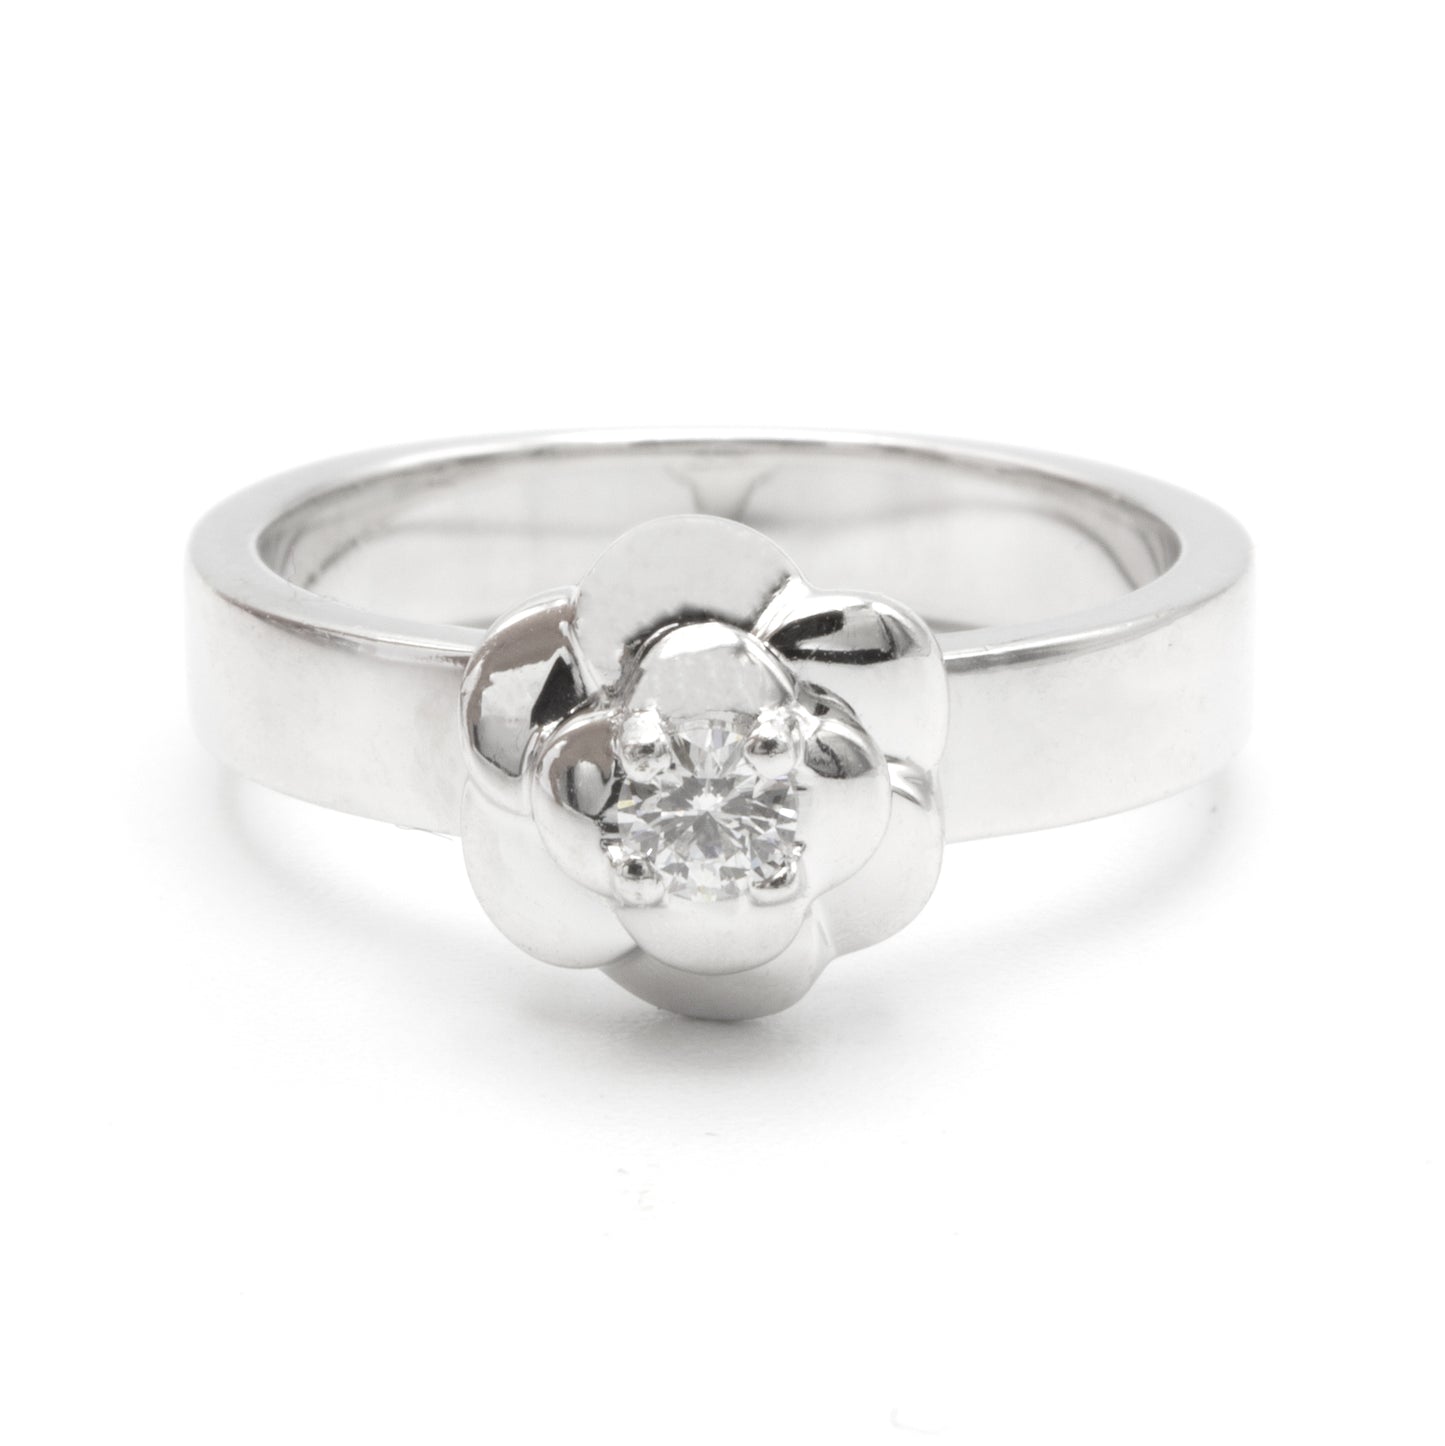 Chanel Camelia ring